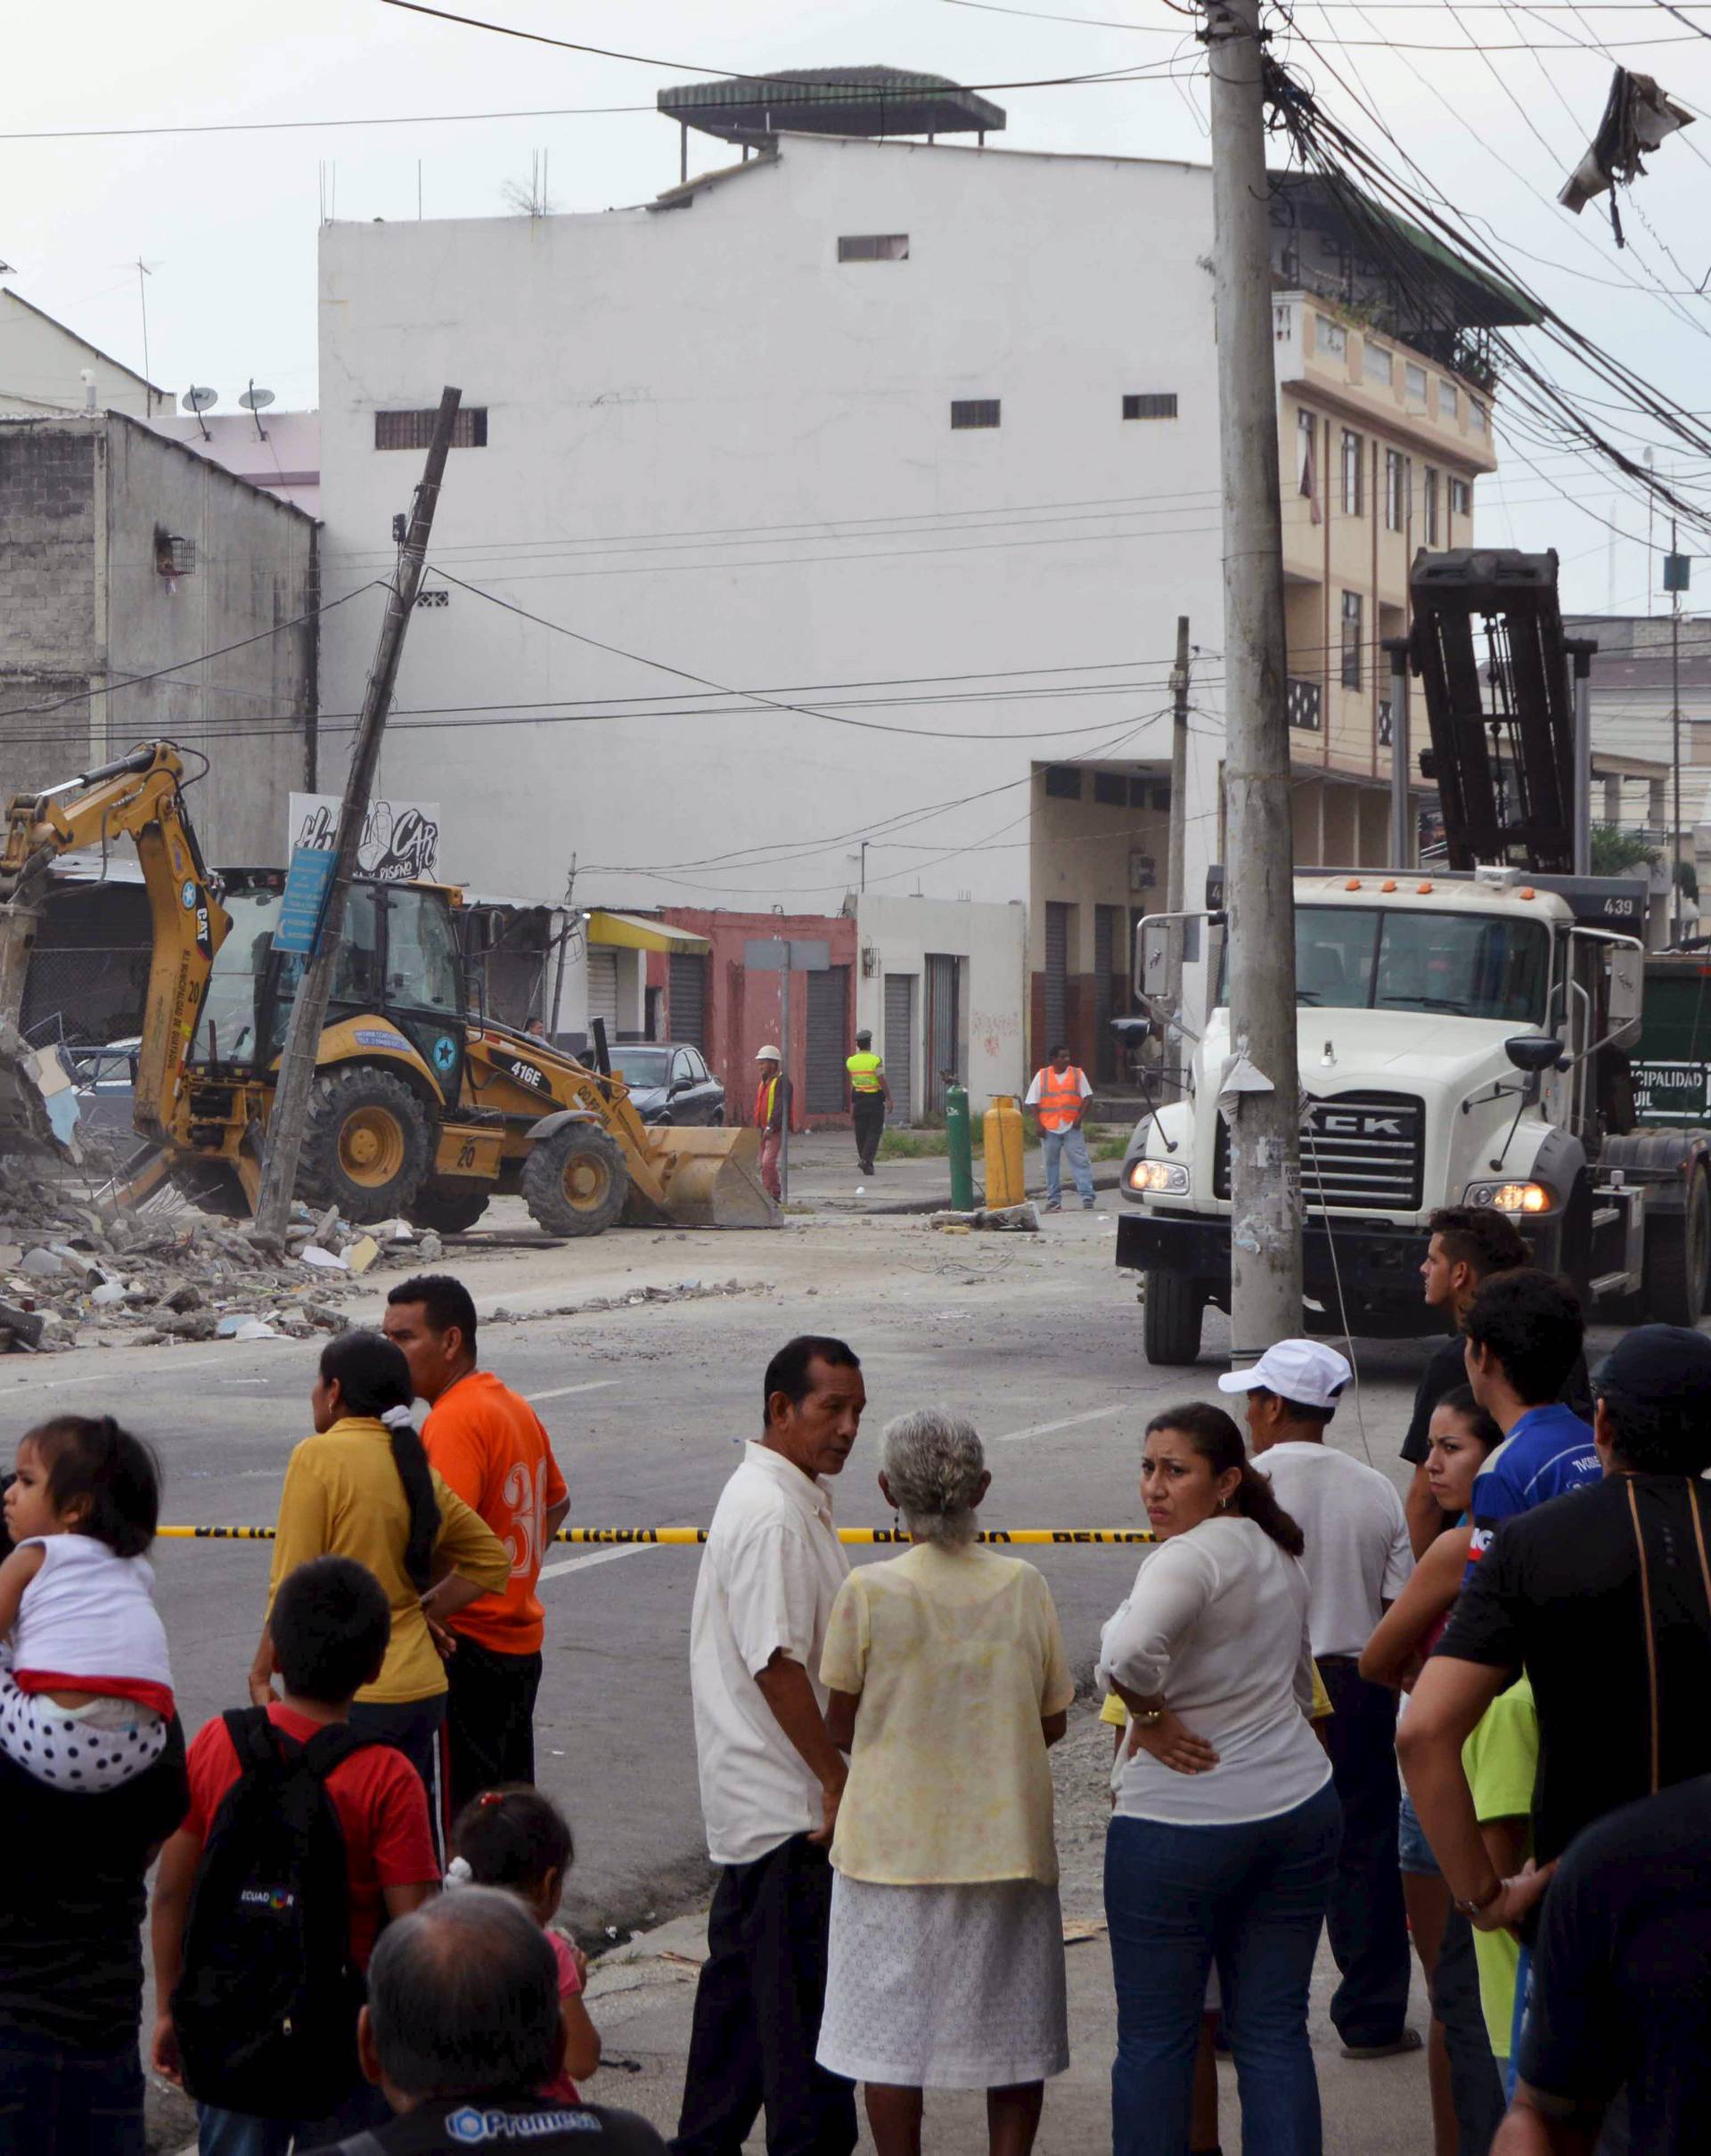 People look as a bulldozer removes the debris of a collapsed house after an earthquake struck off the Pacific coast, in Guayaquil